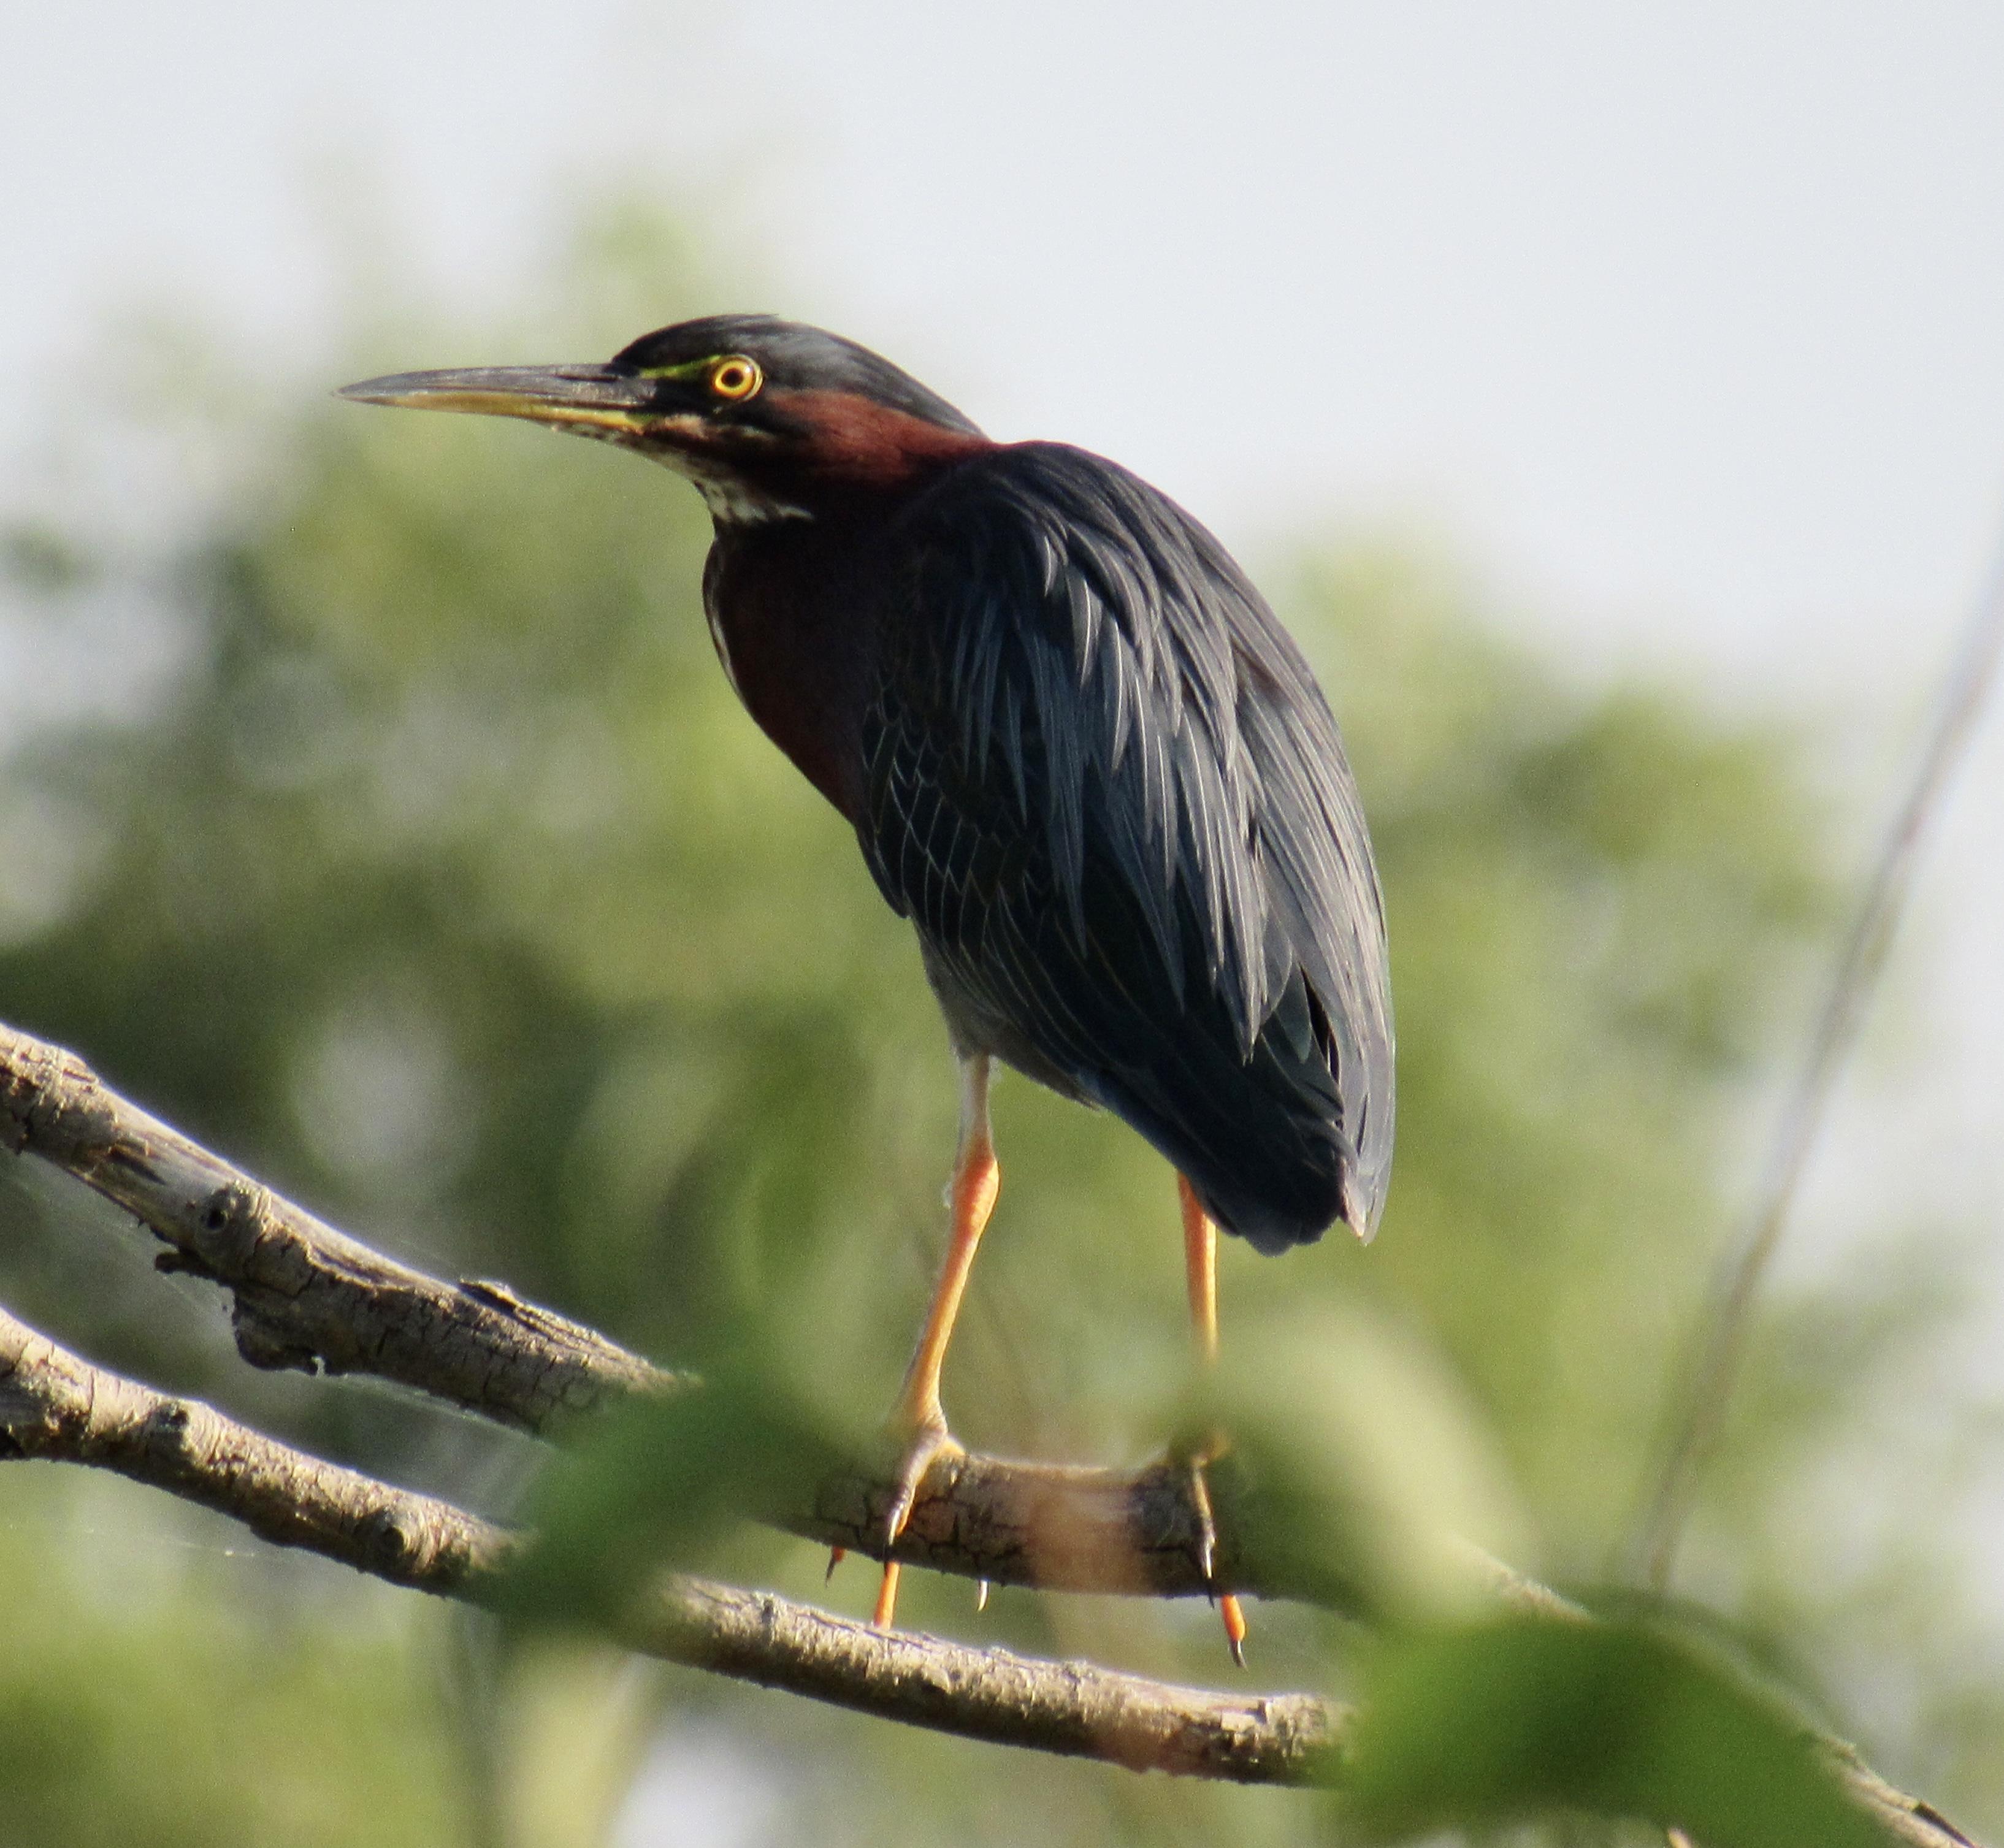 A green heron standing on a tree branch.